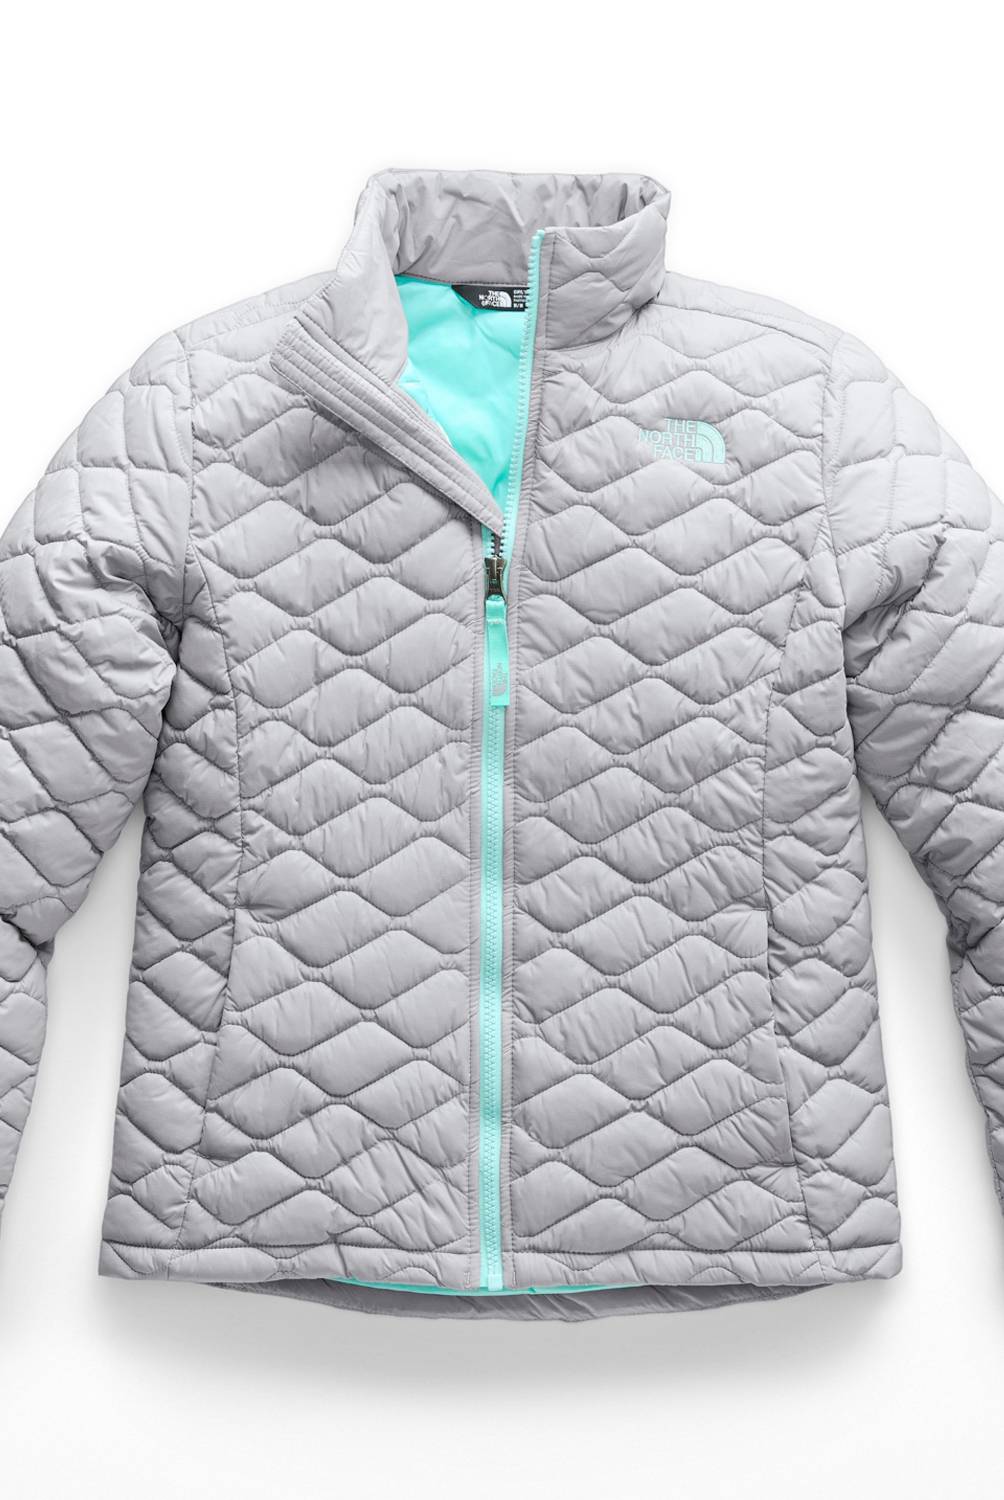 THE NORTH FACE - Casaca infantil outdoors